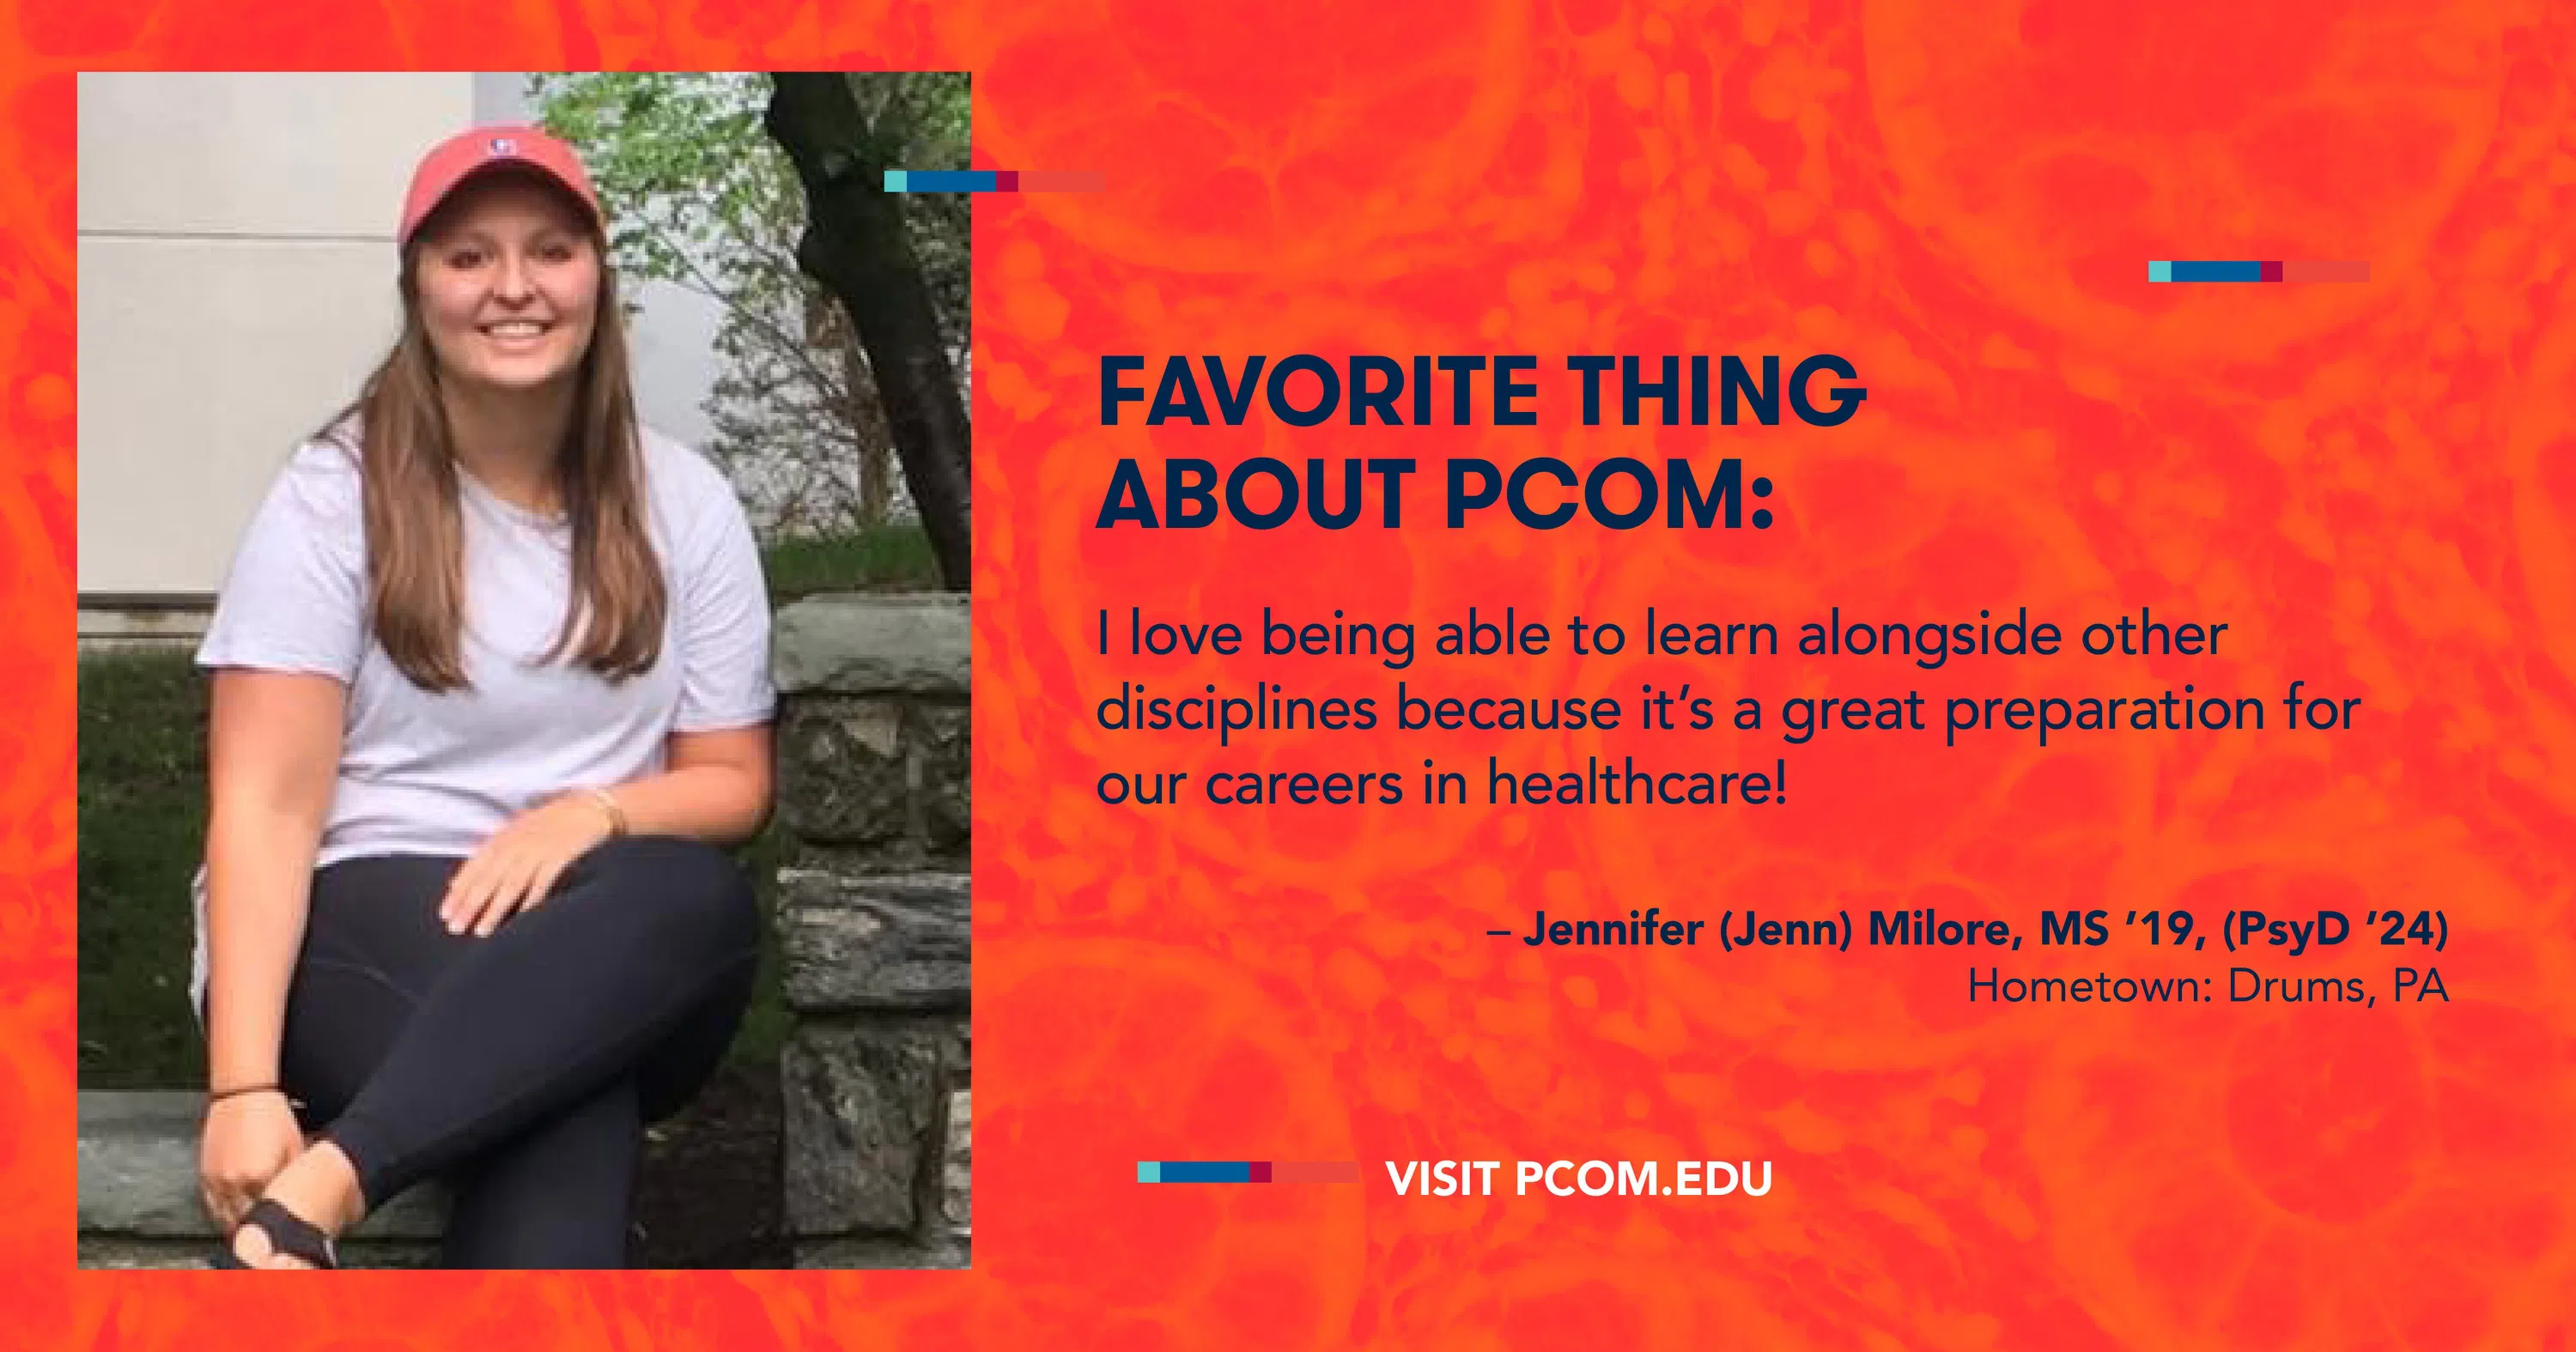 Thoughts from a Student Ambassador on her favorite thing about PCOM